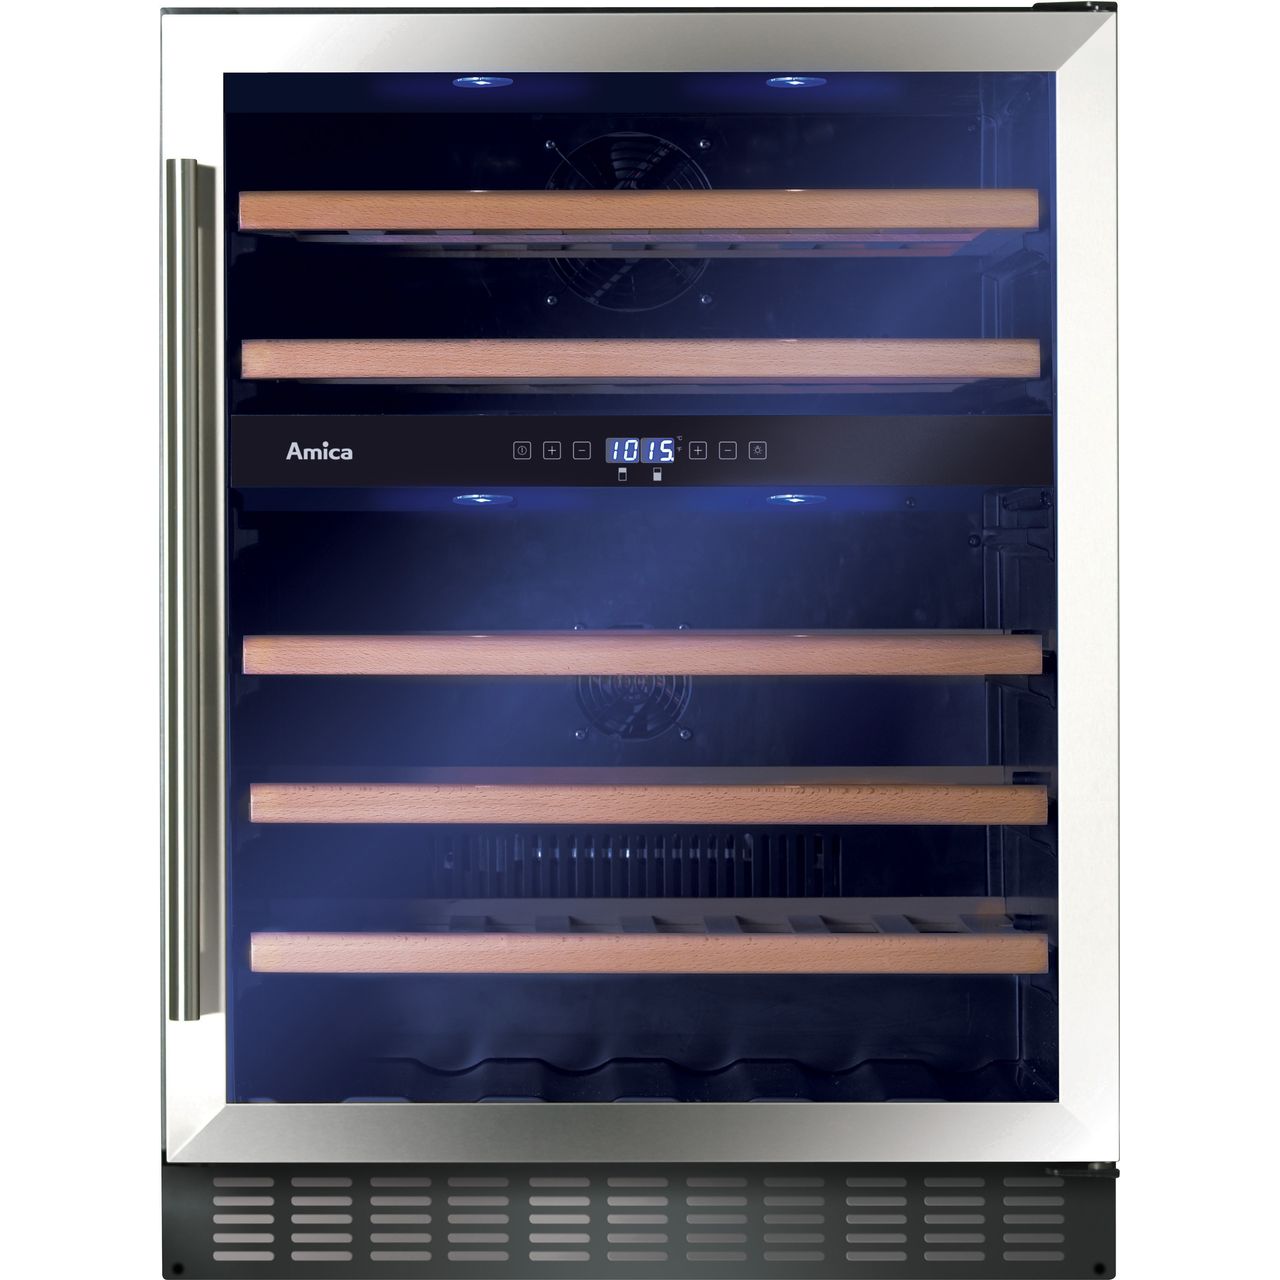 Amica AWC601SS Wine Cooler Review